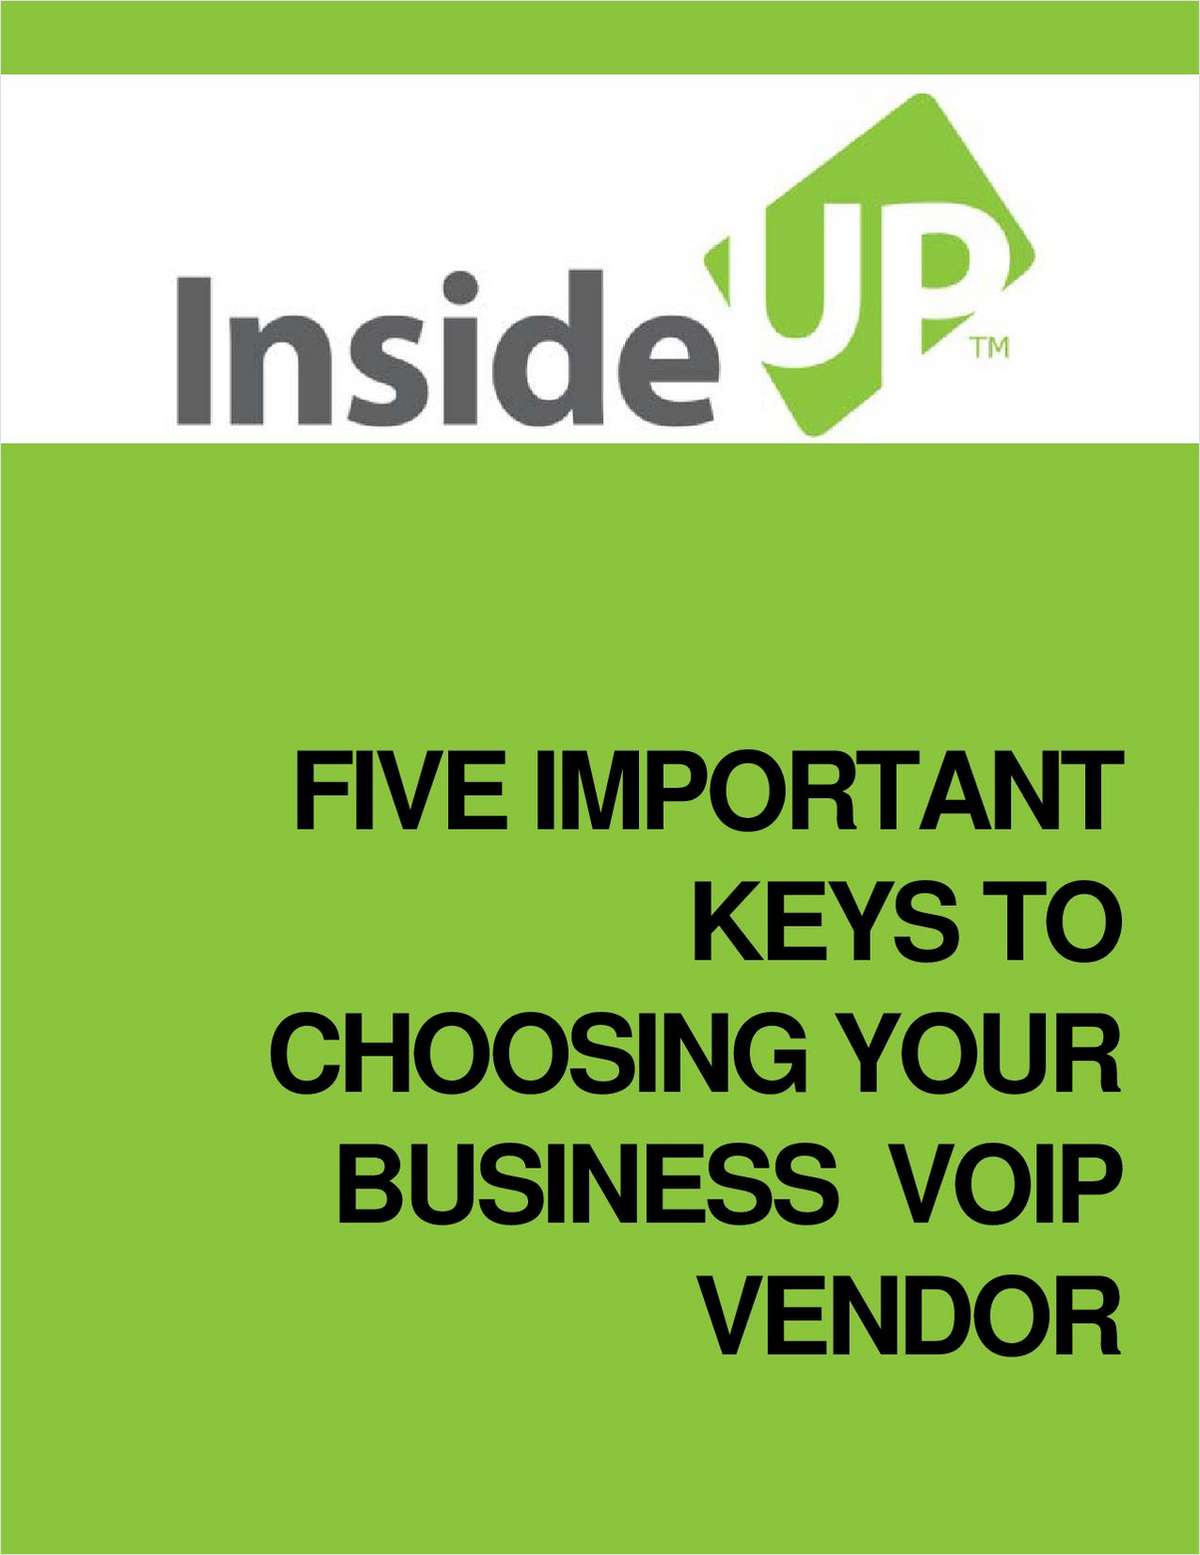 Five Important Keys To Choosing Your Business VoIP Vendor